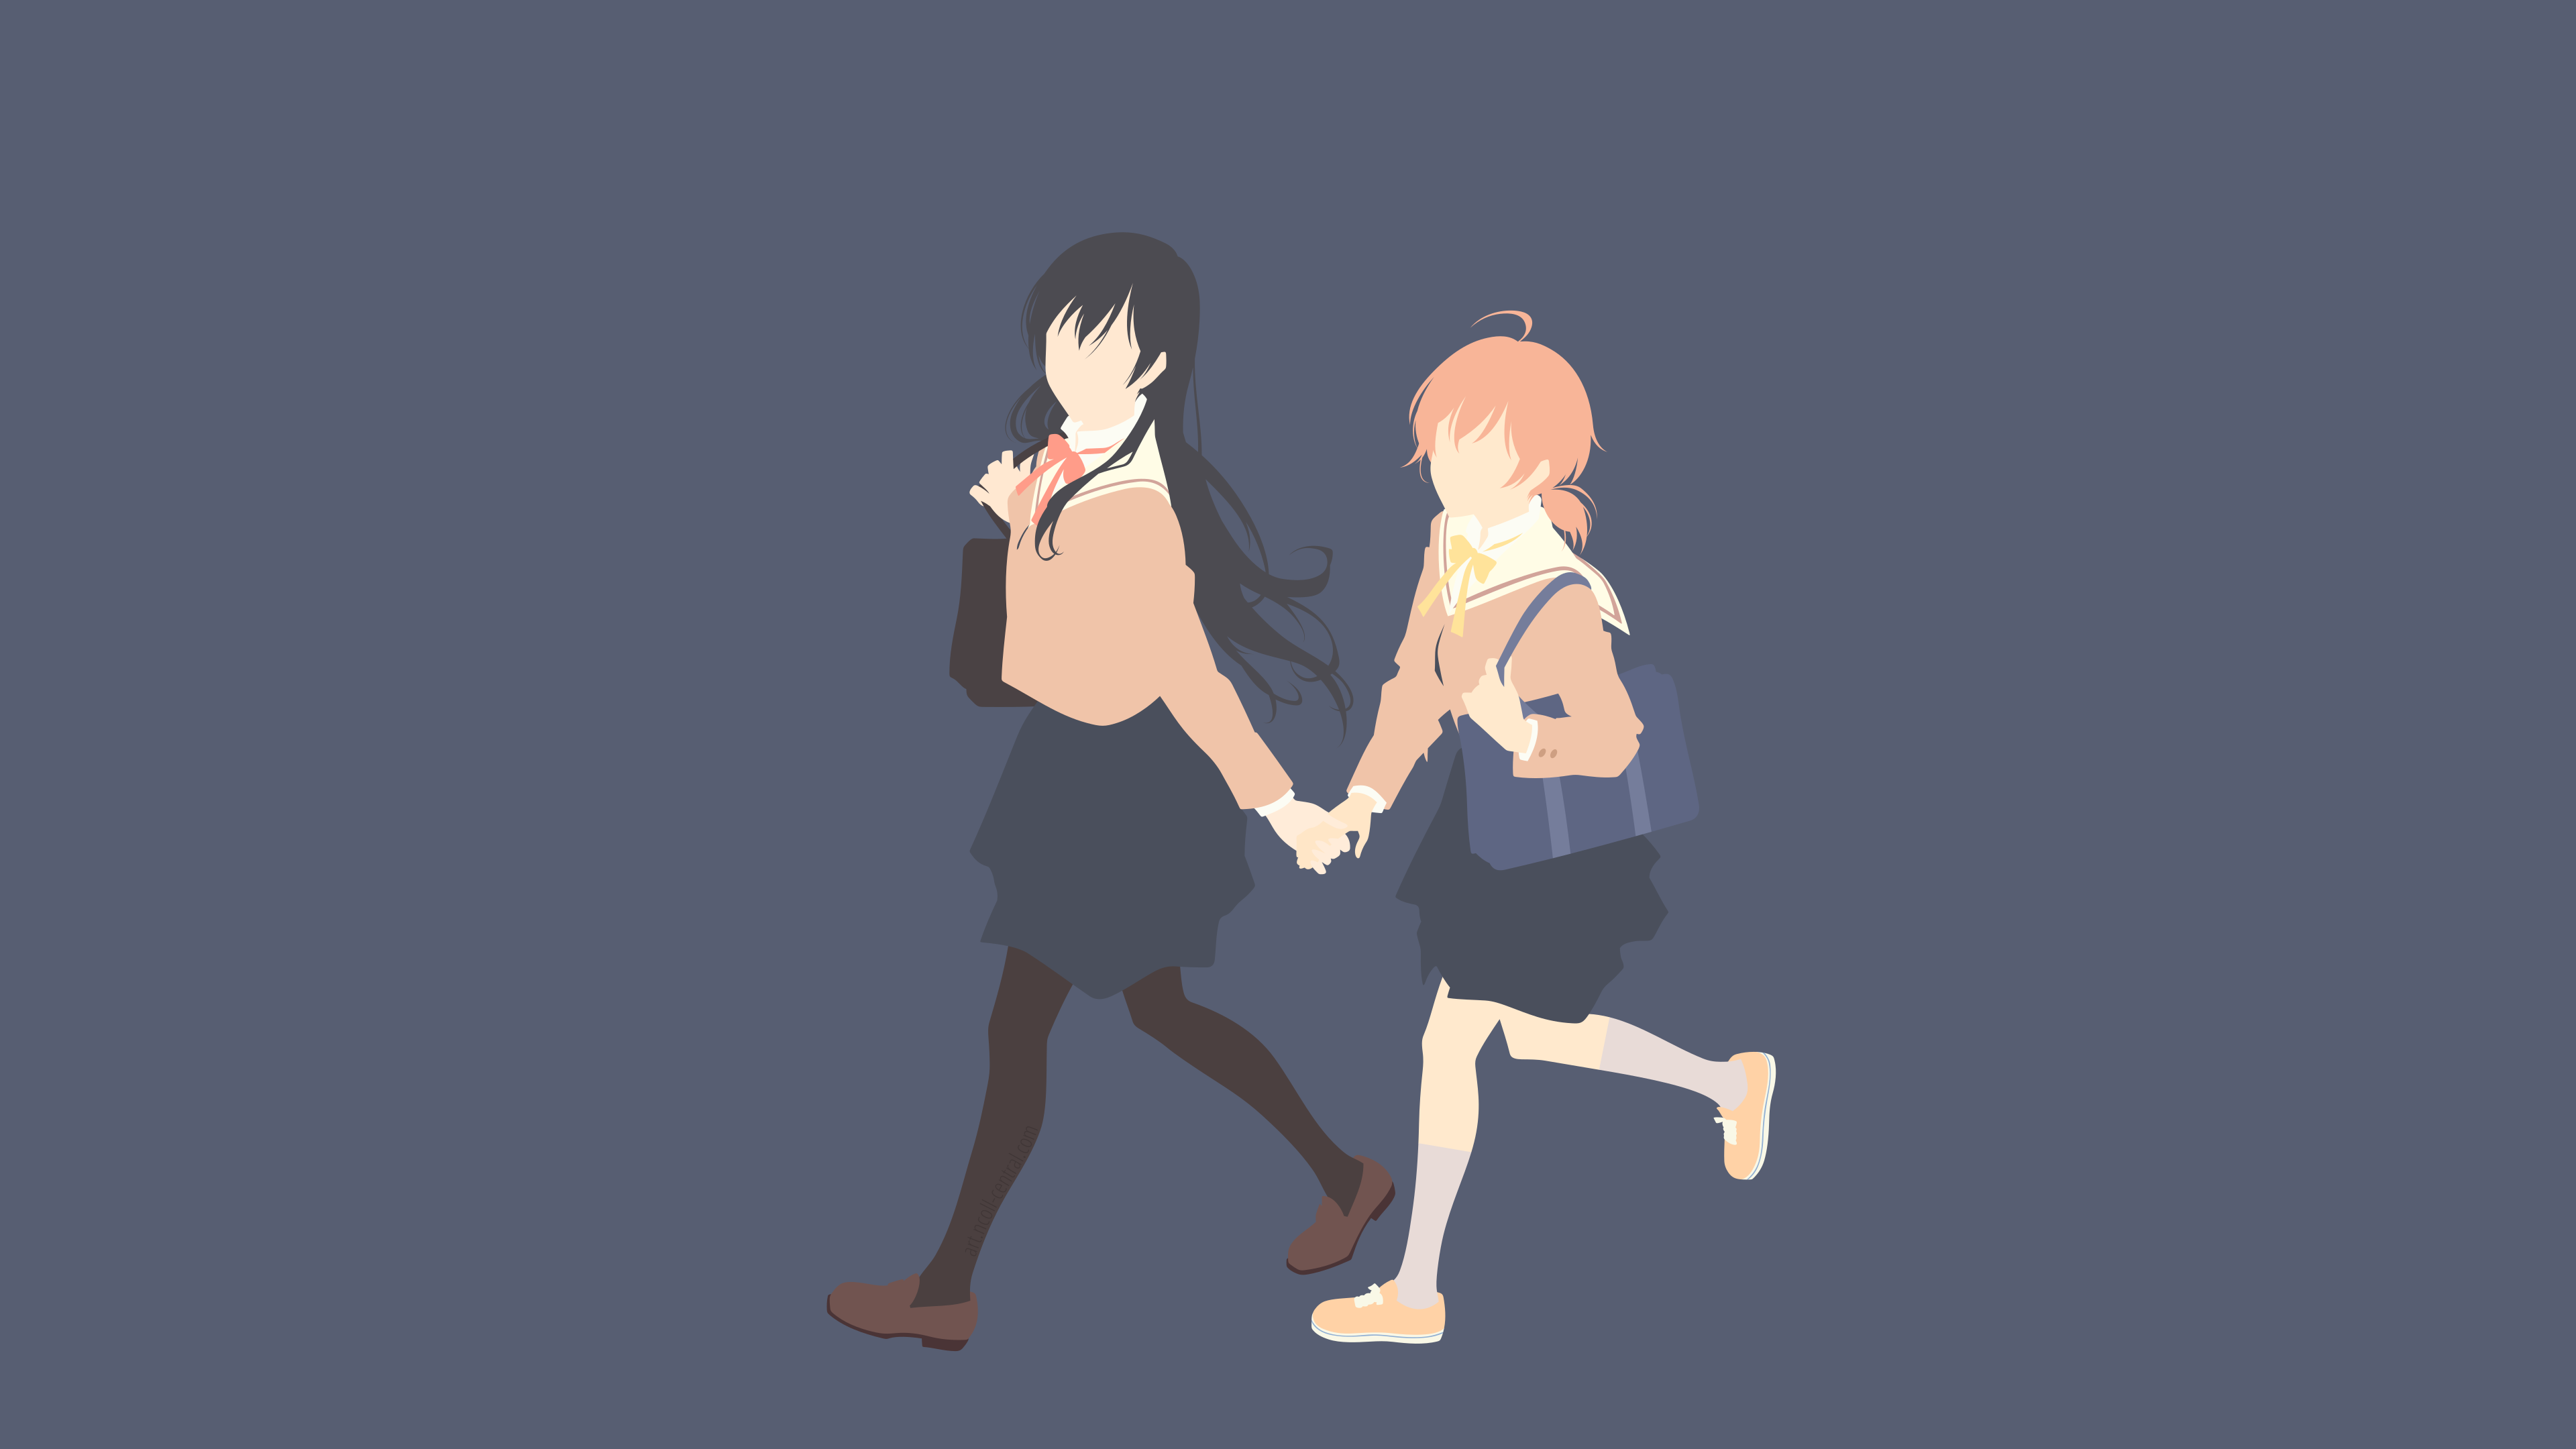 60 Bloom into You HD Wallpapers and Backgrounds